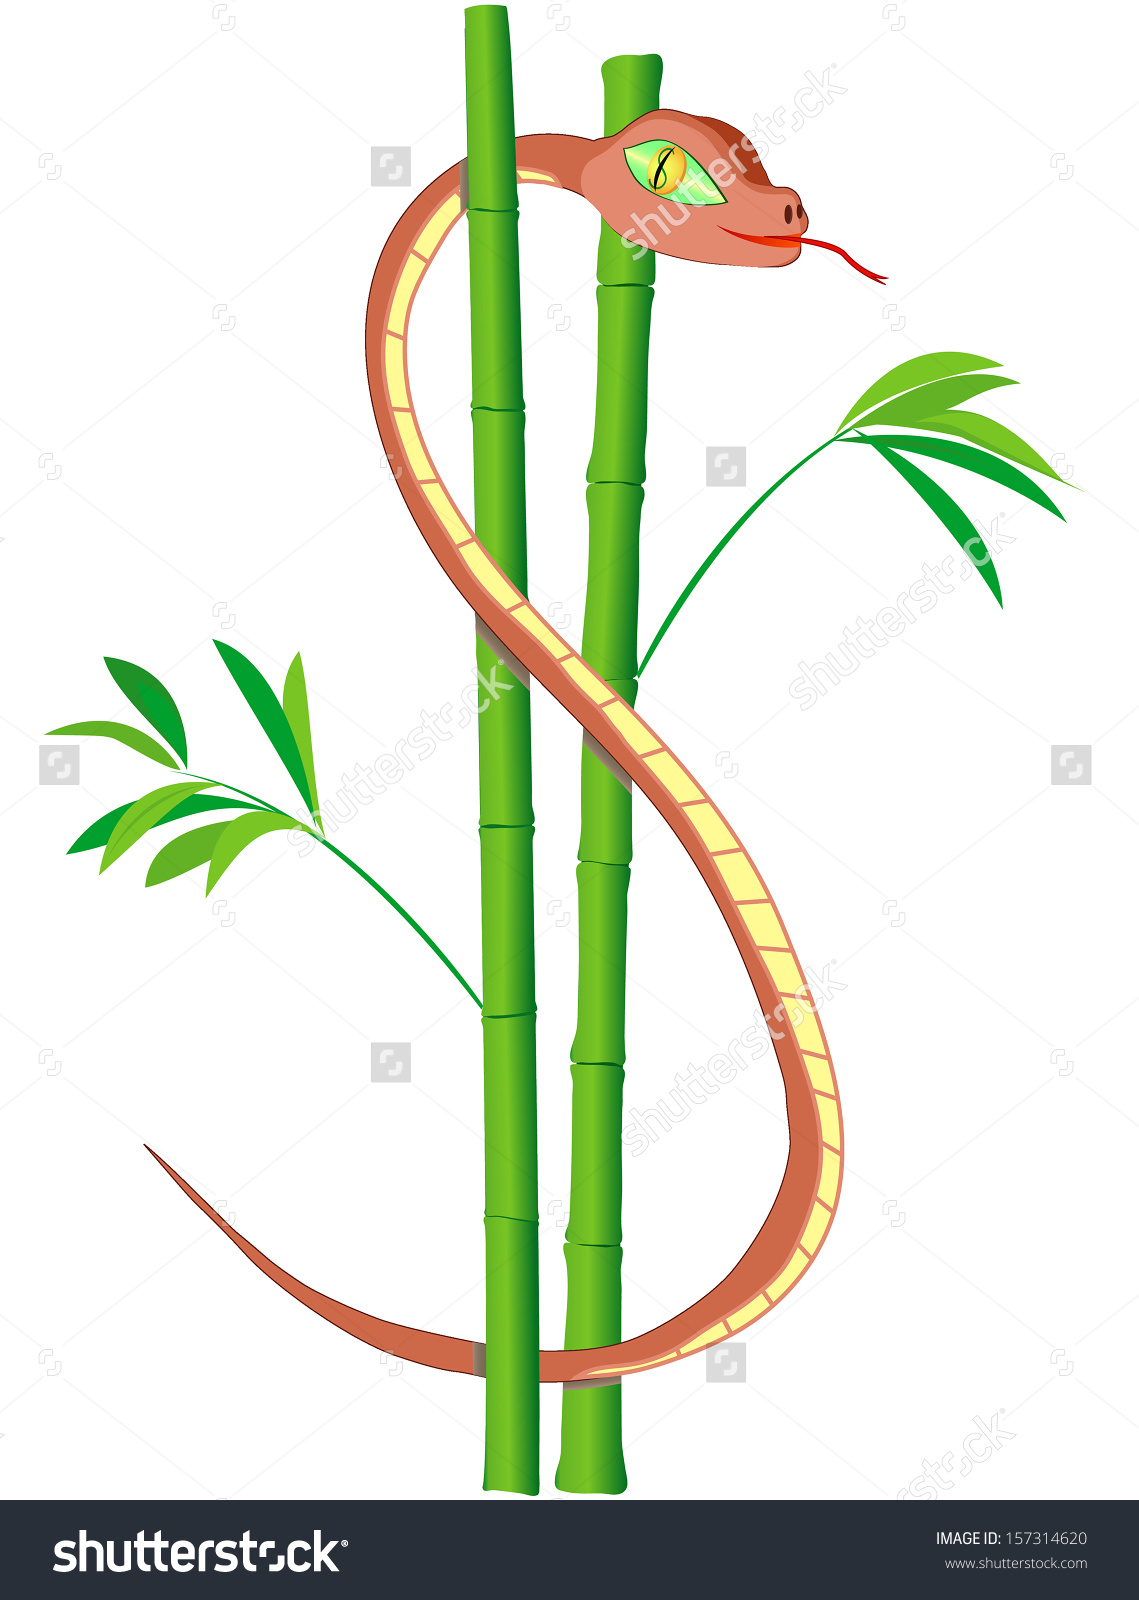 Bamboo Snake clipart #3, Download drawings